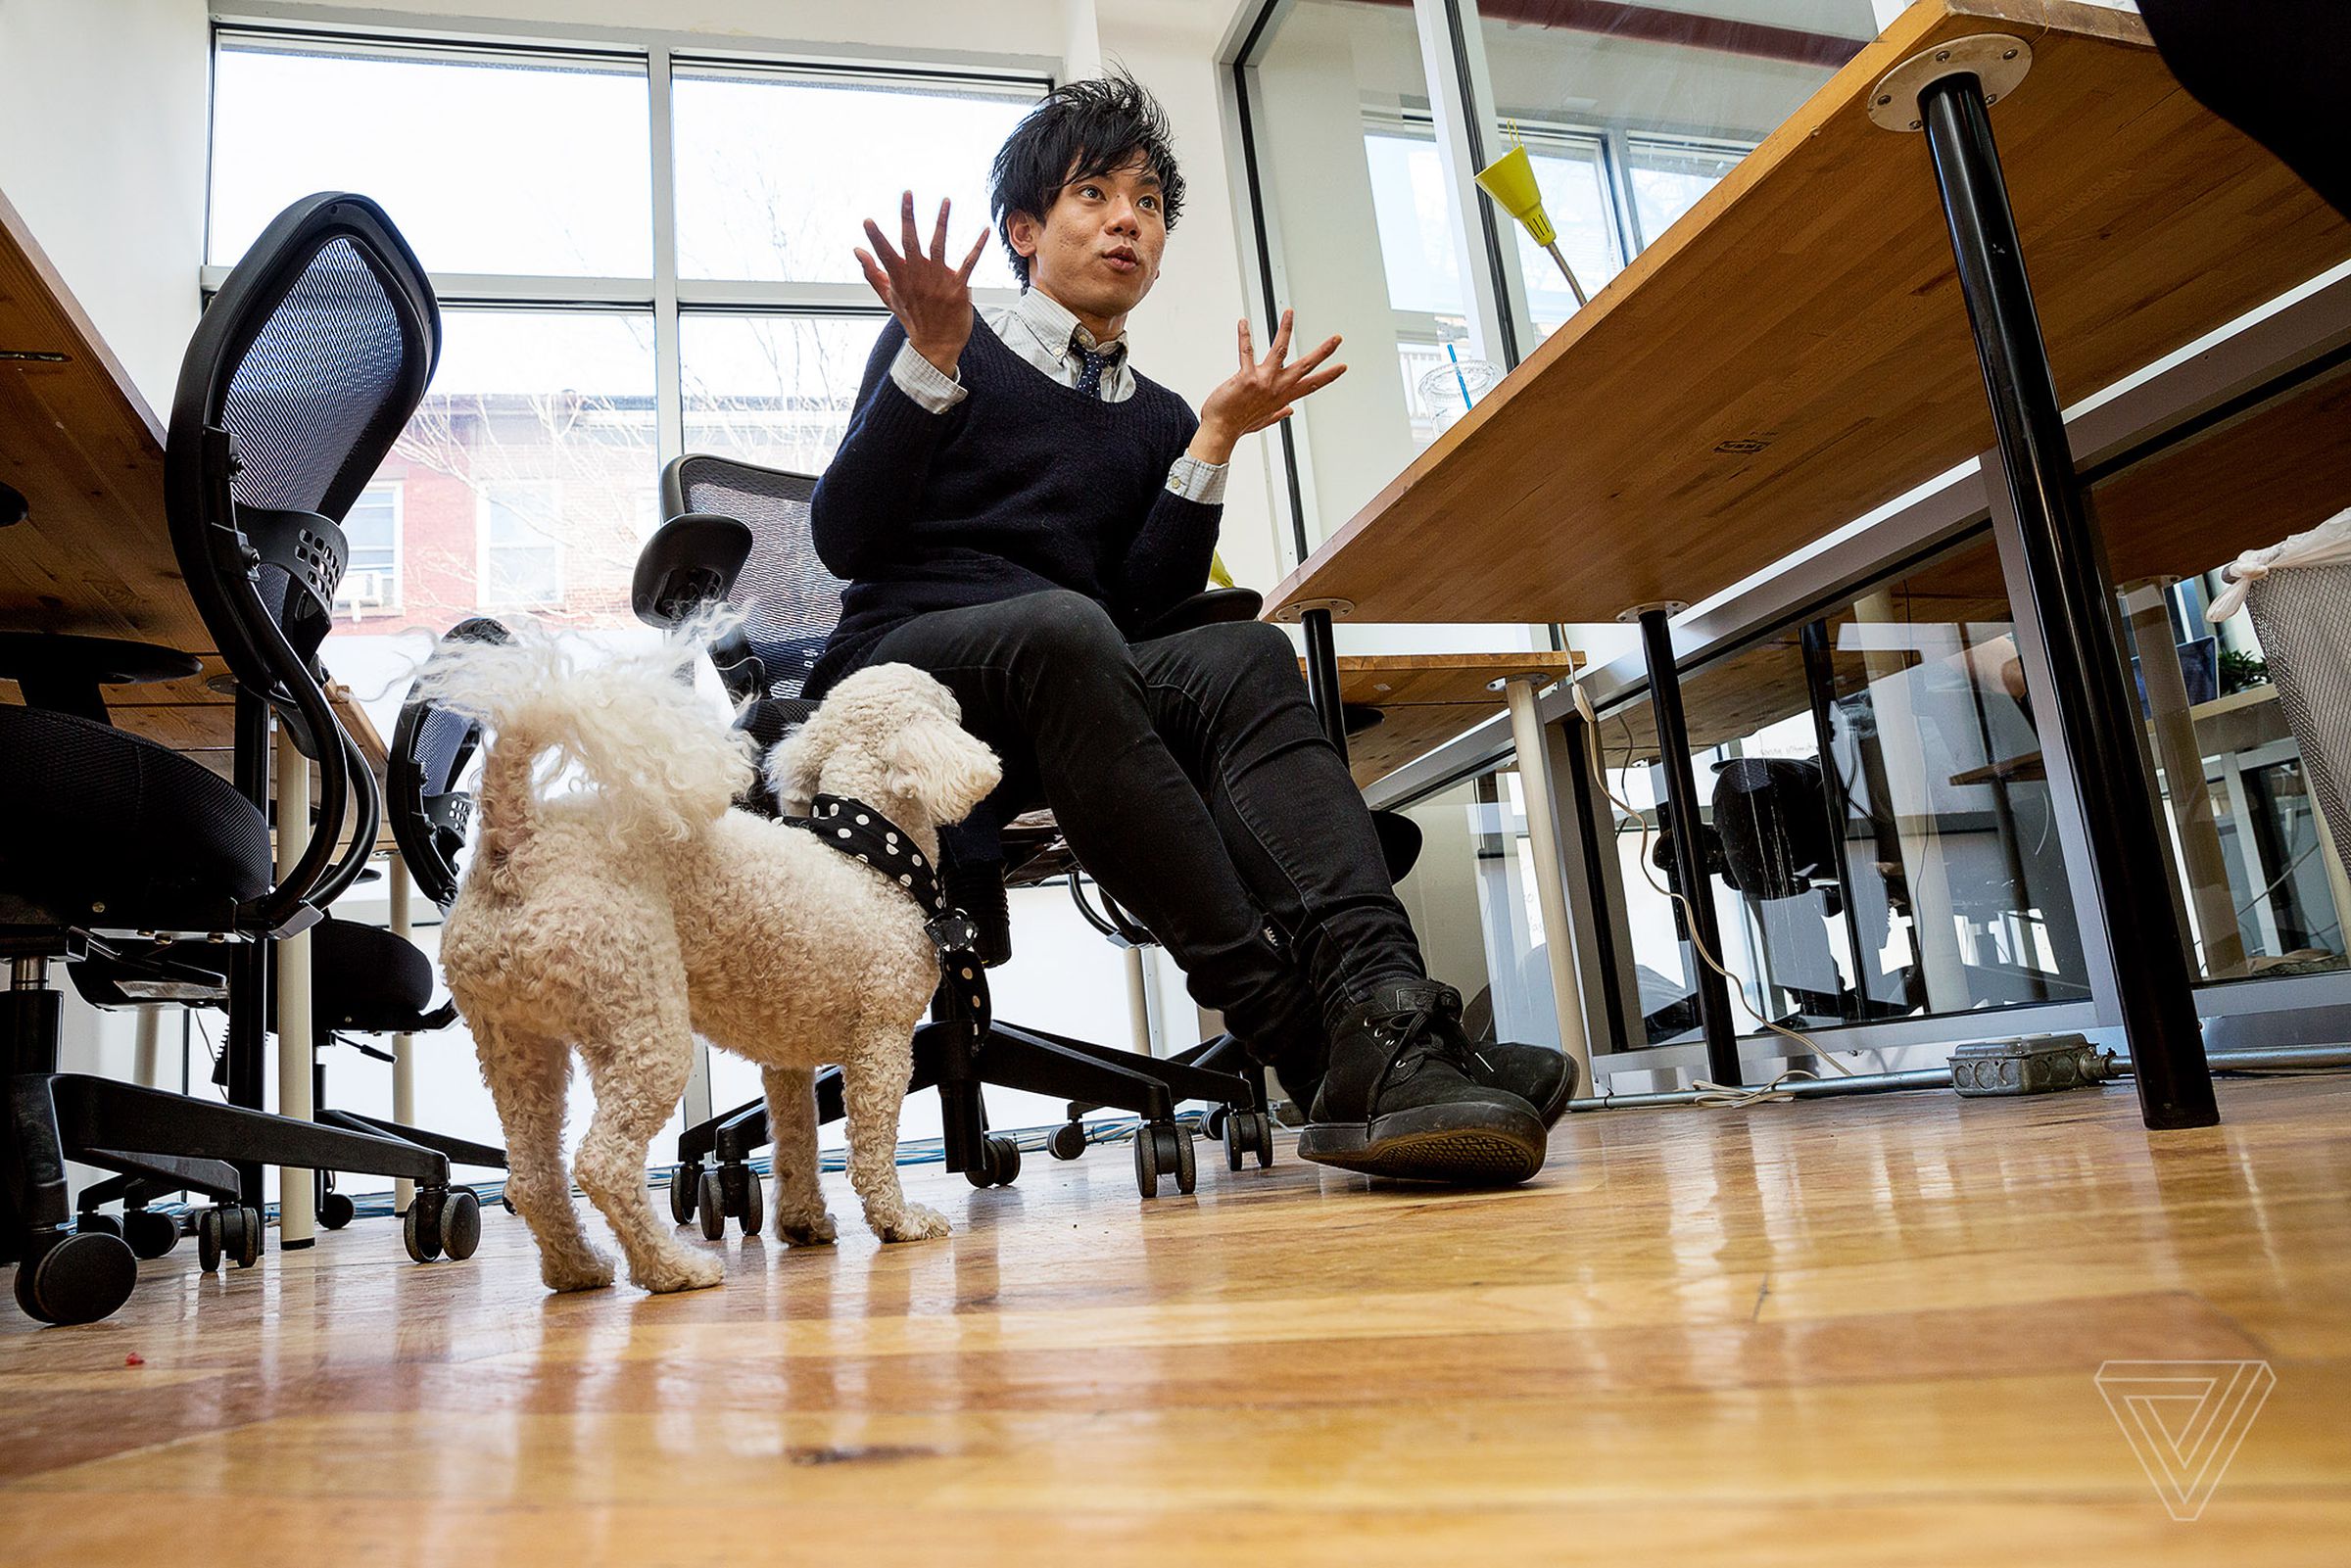 Brad Kim with his dog Mugatu in the Know Your Meme office in Williamsburg, New York.